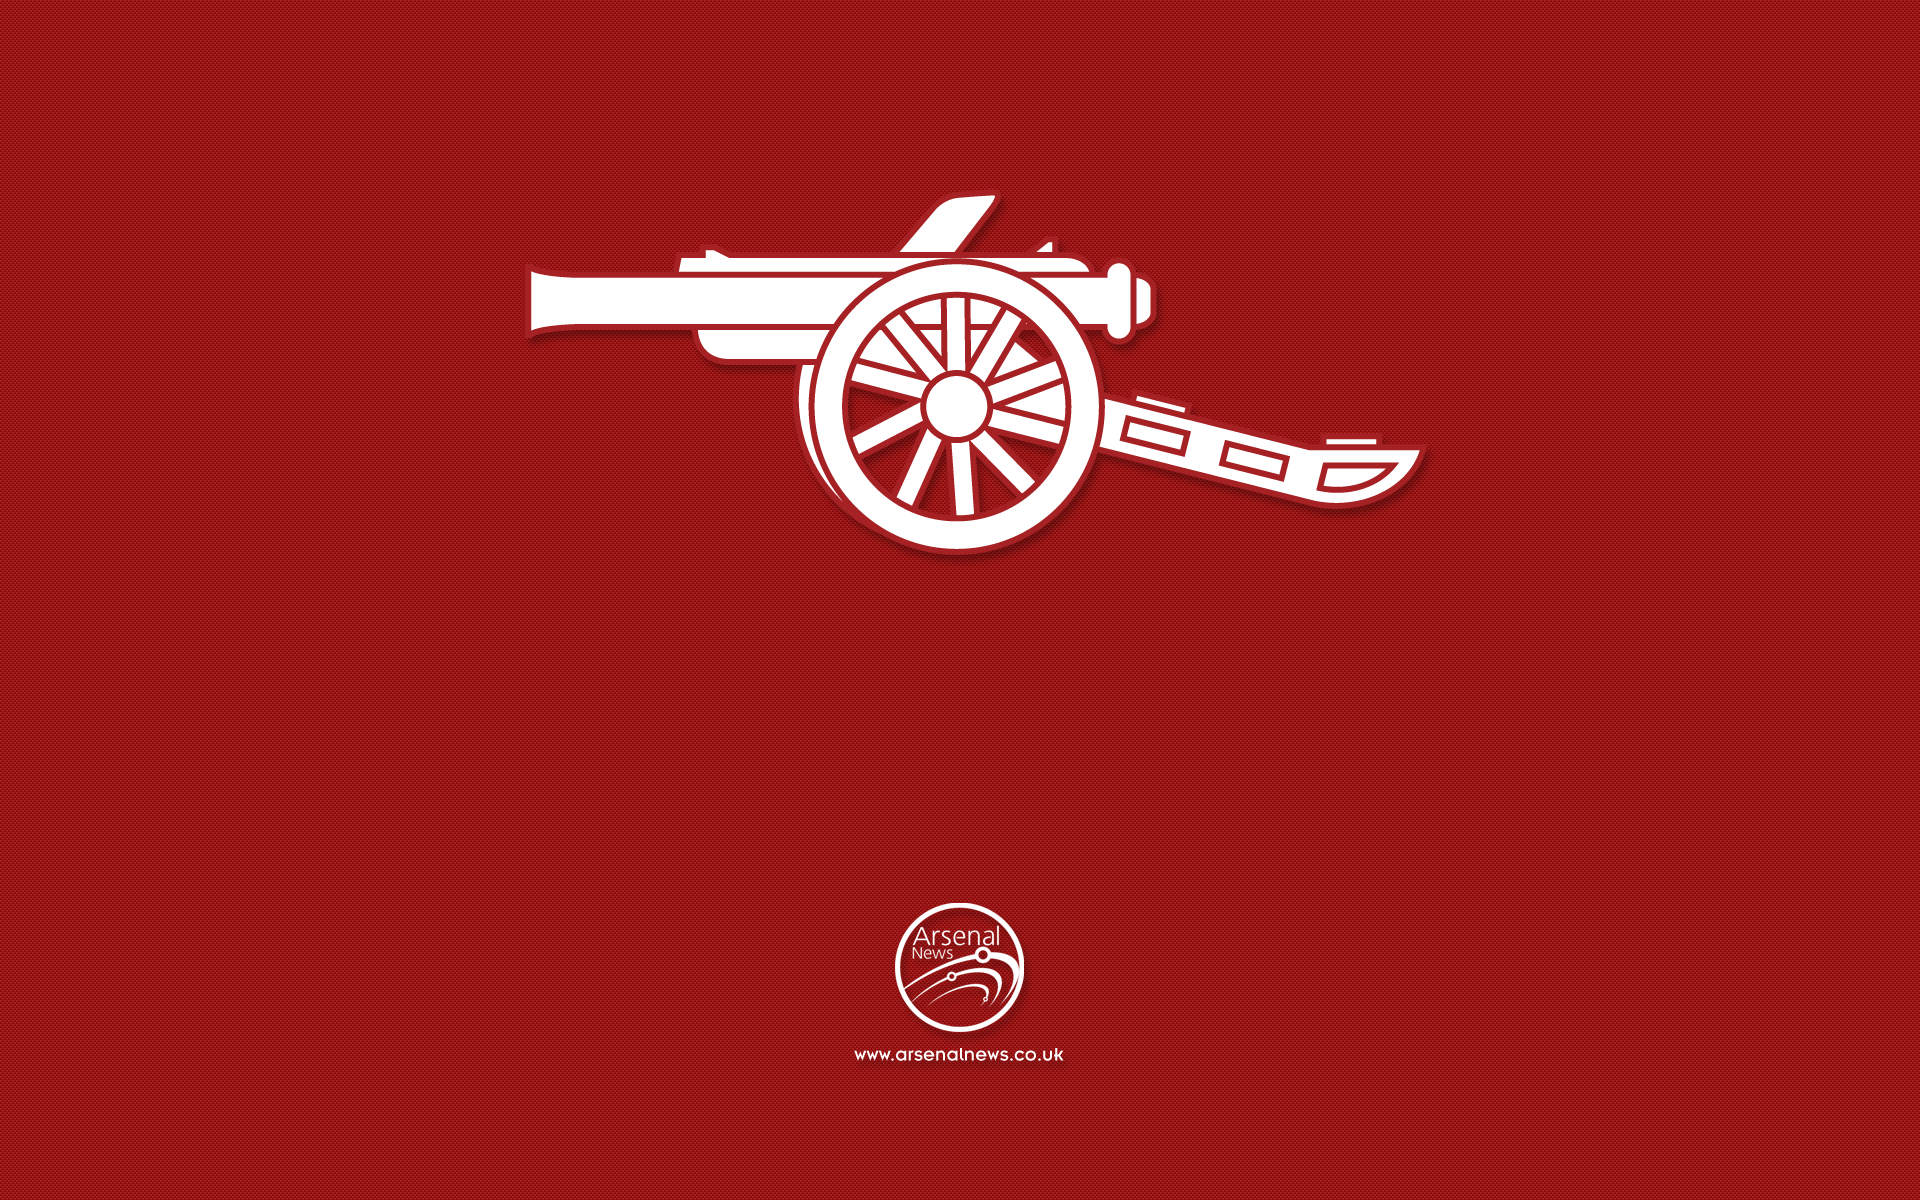 Arsenal Gunners Wallpaper HD Picture 4 HD Wallpaper. Places to